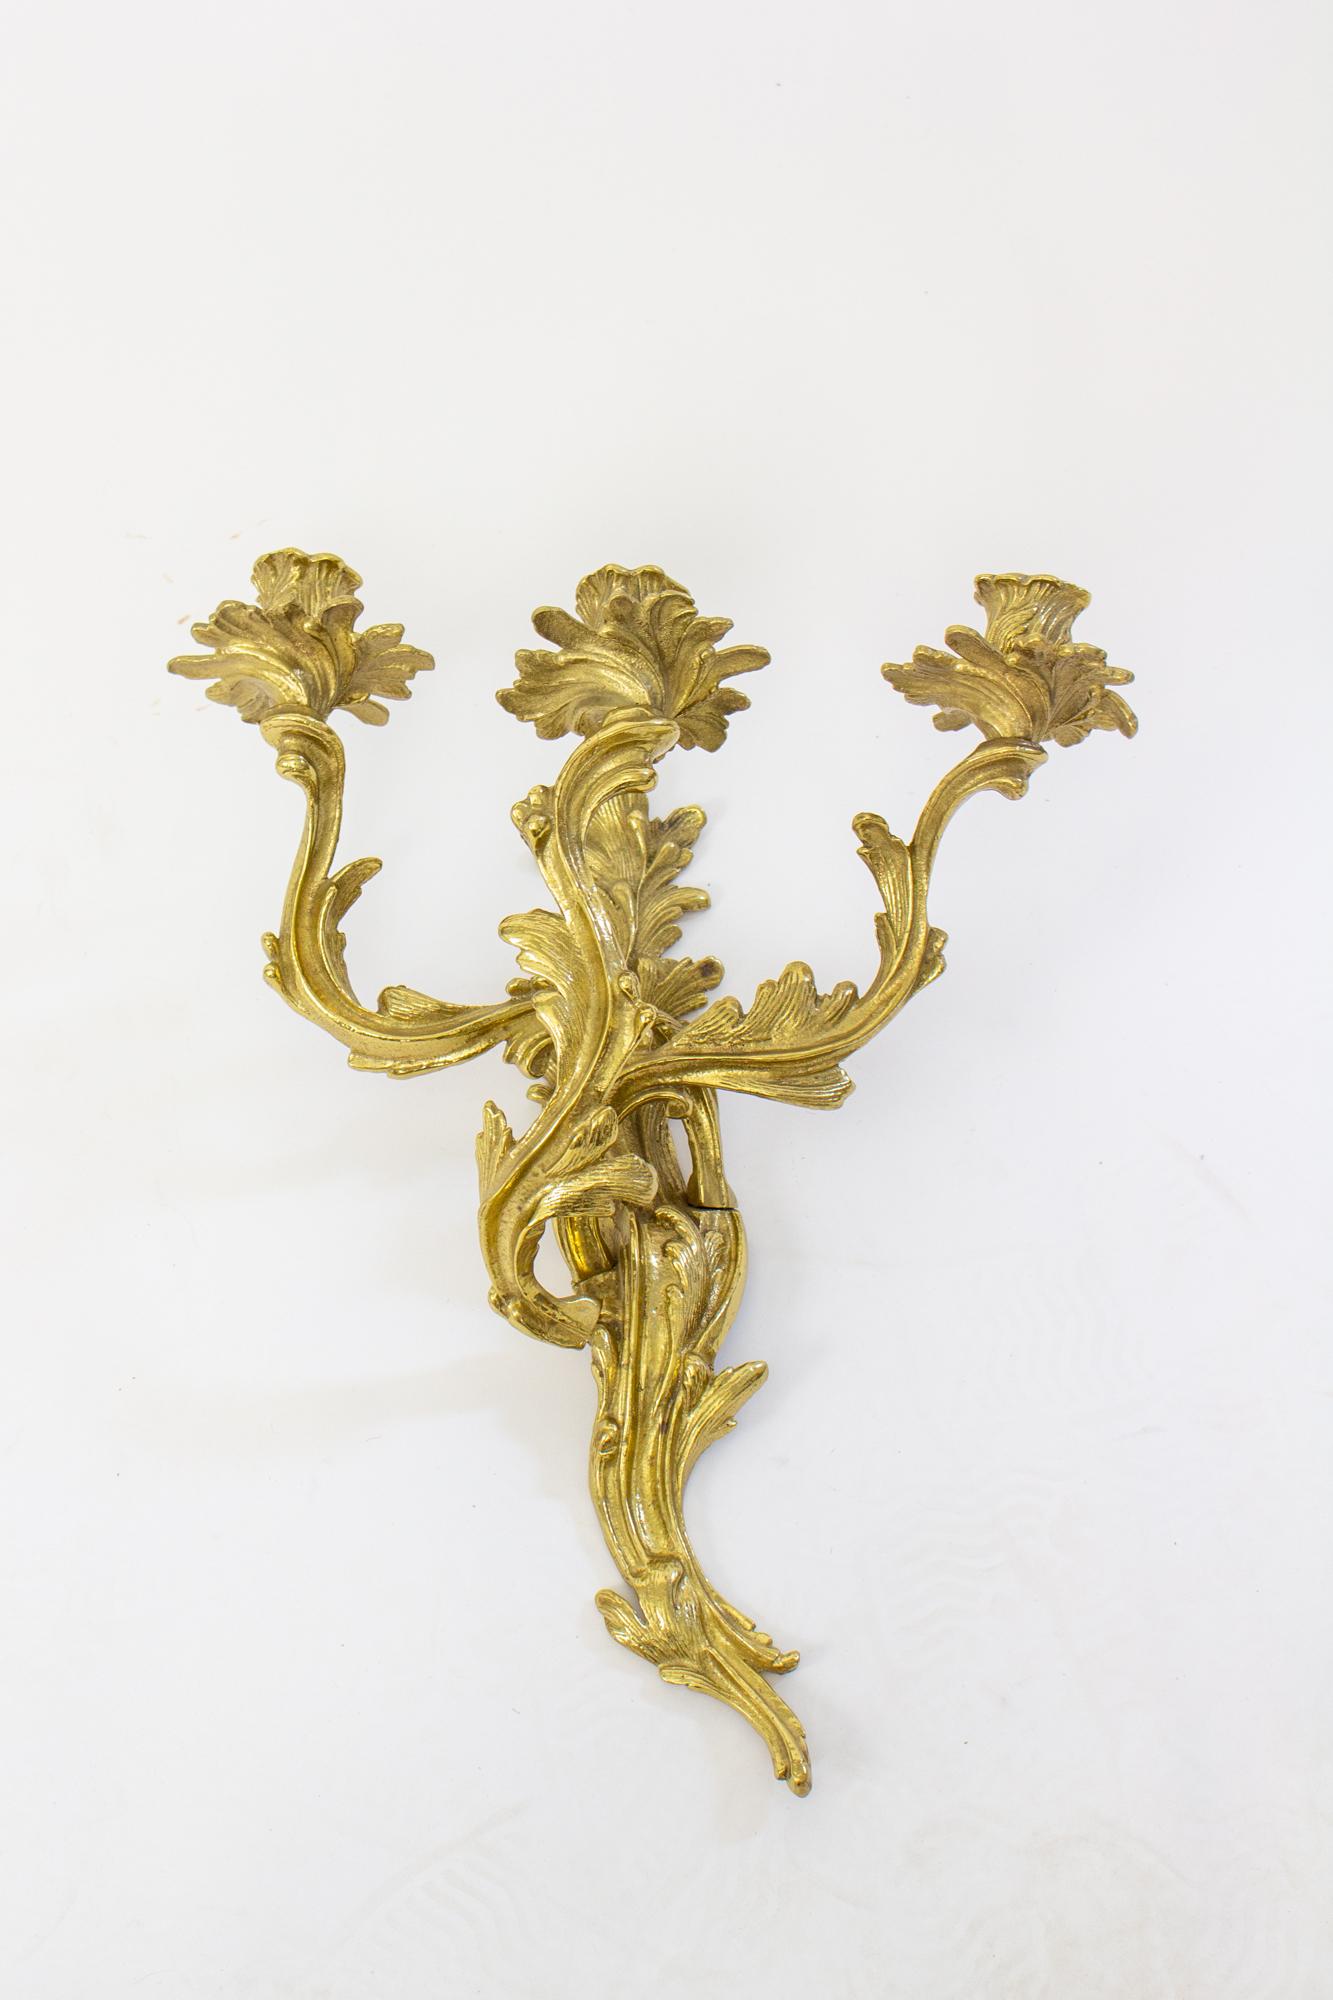 Mid 20th Century brass Louis XV style sconces - a pair. Solid cast brass wall sconces with three arms in an orate and organic manner characteristic of rococo style. By Glo-Mar of NYC.